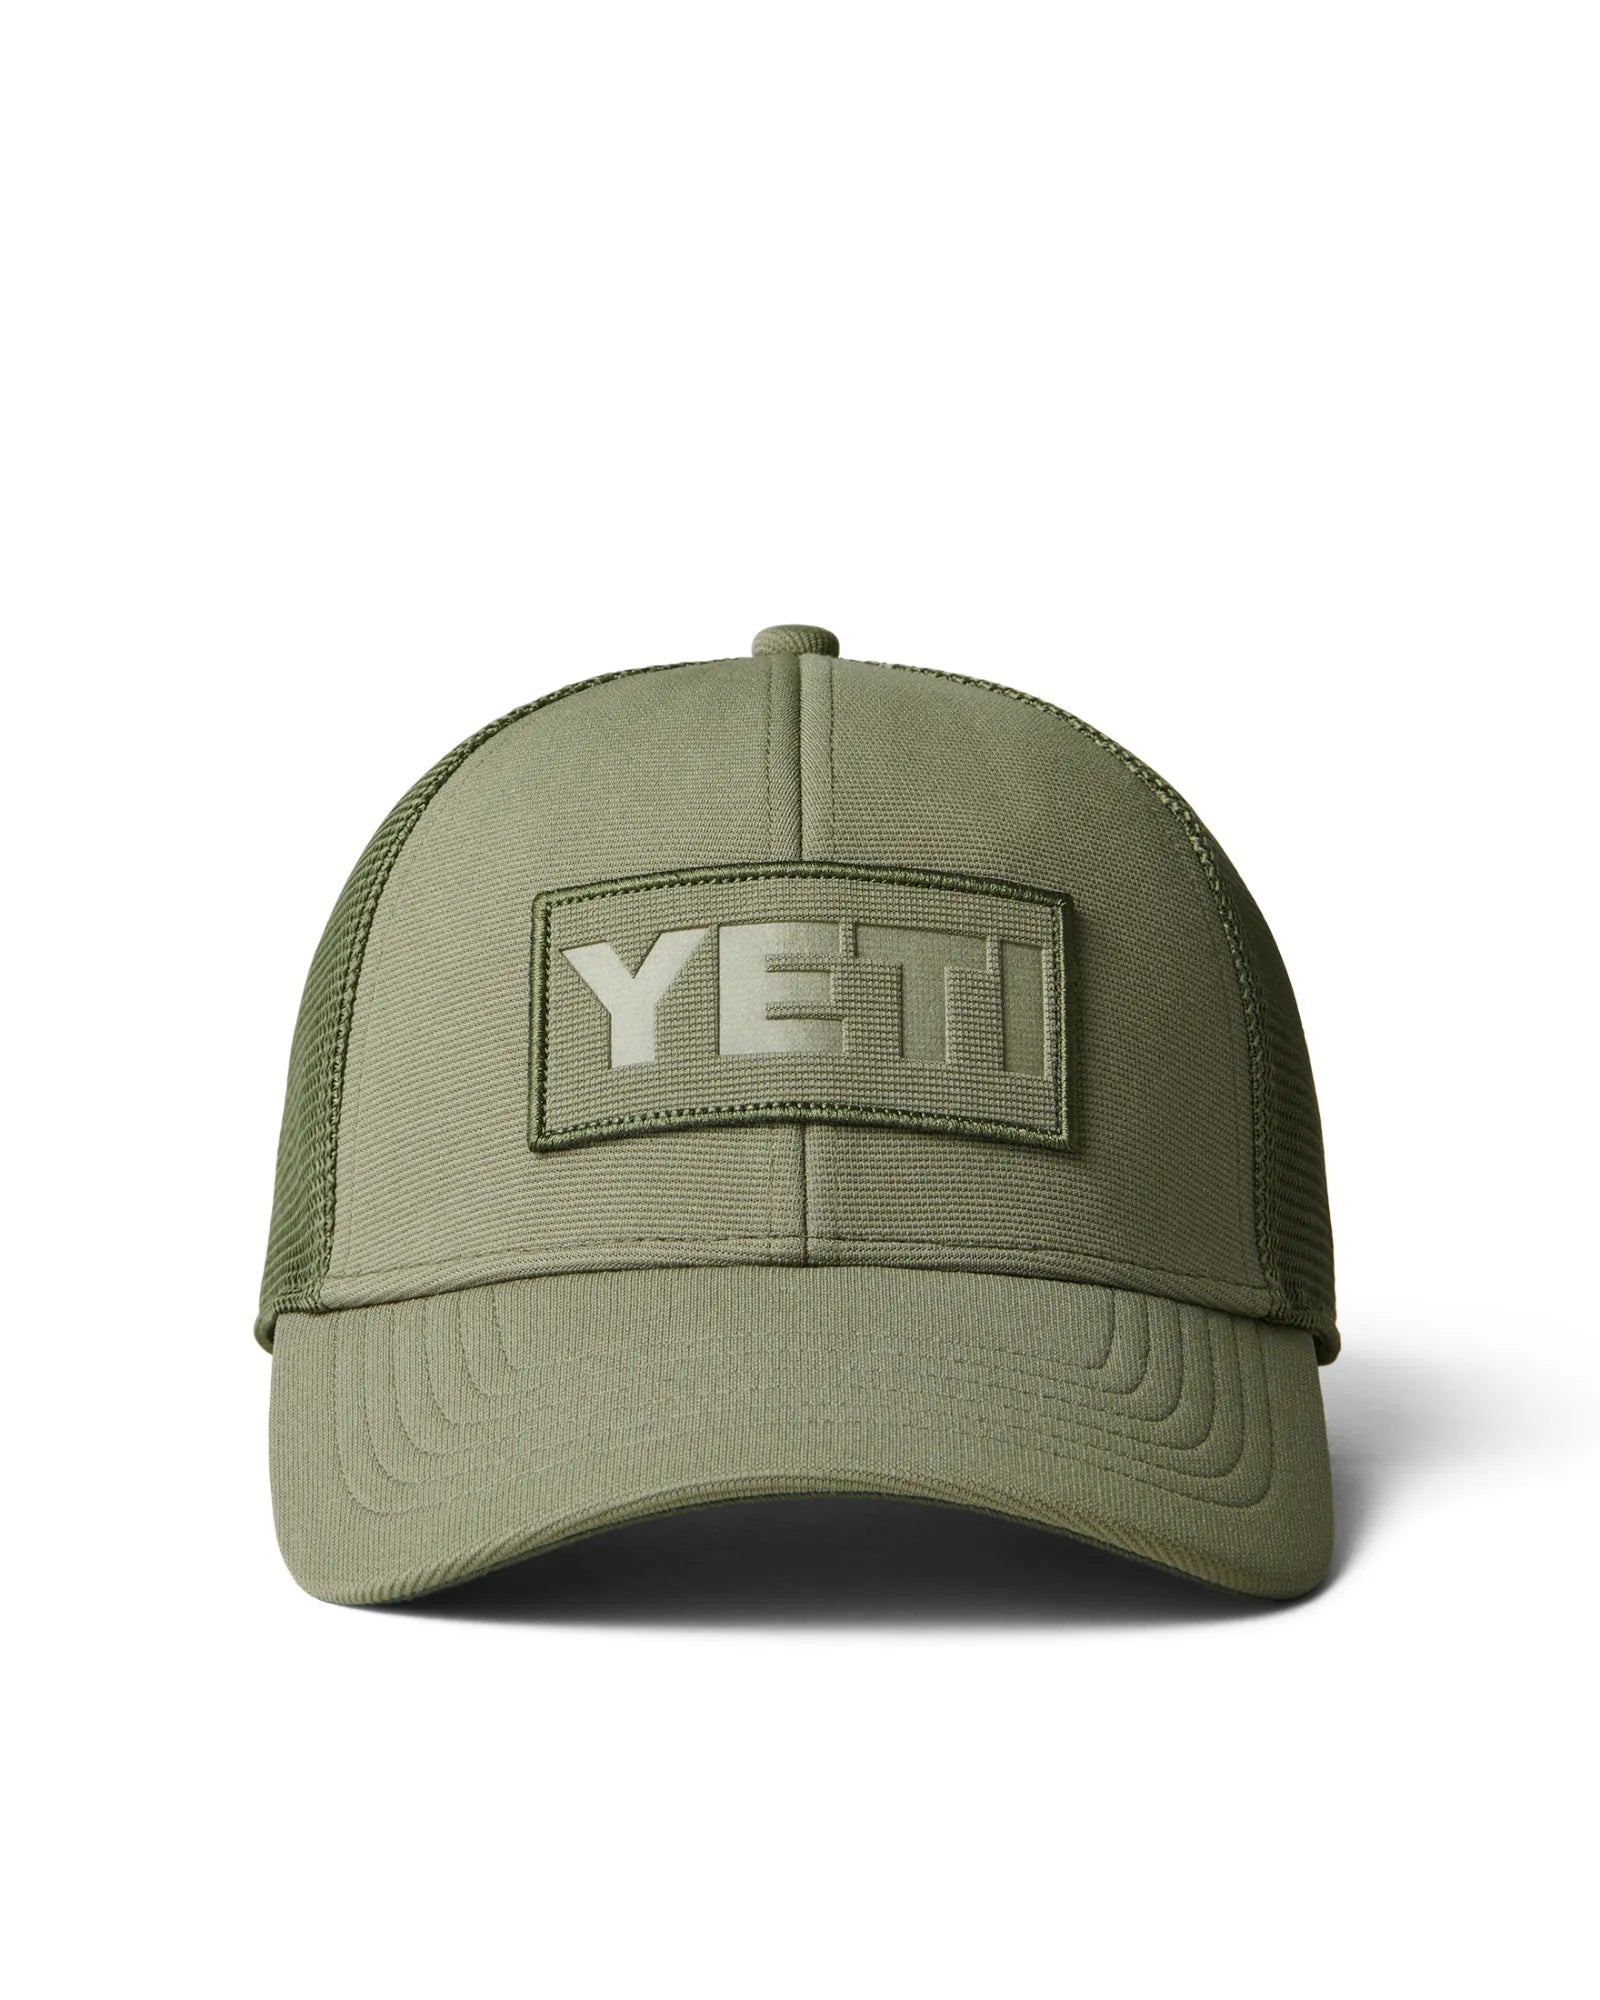 Patch on Patch Trucker Hat - Olive